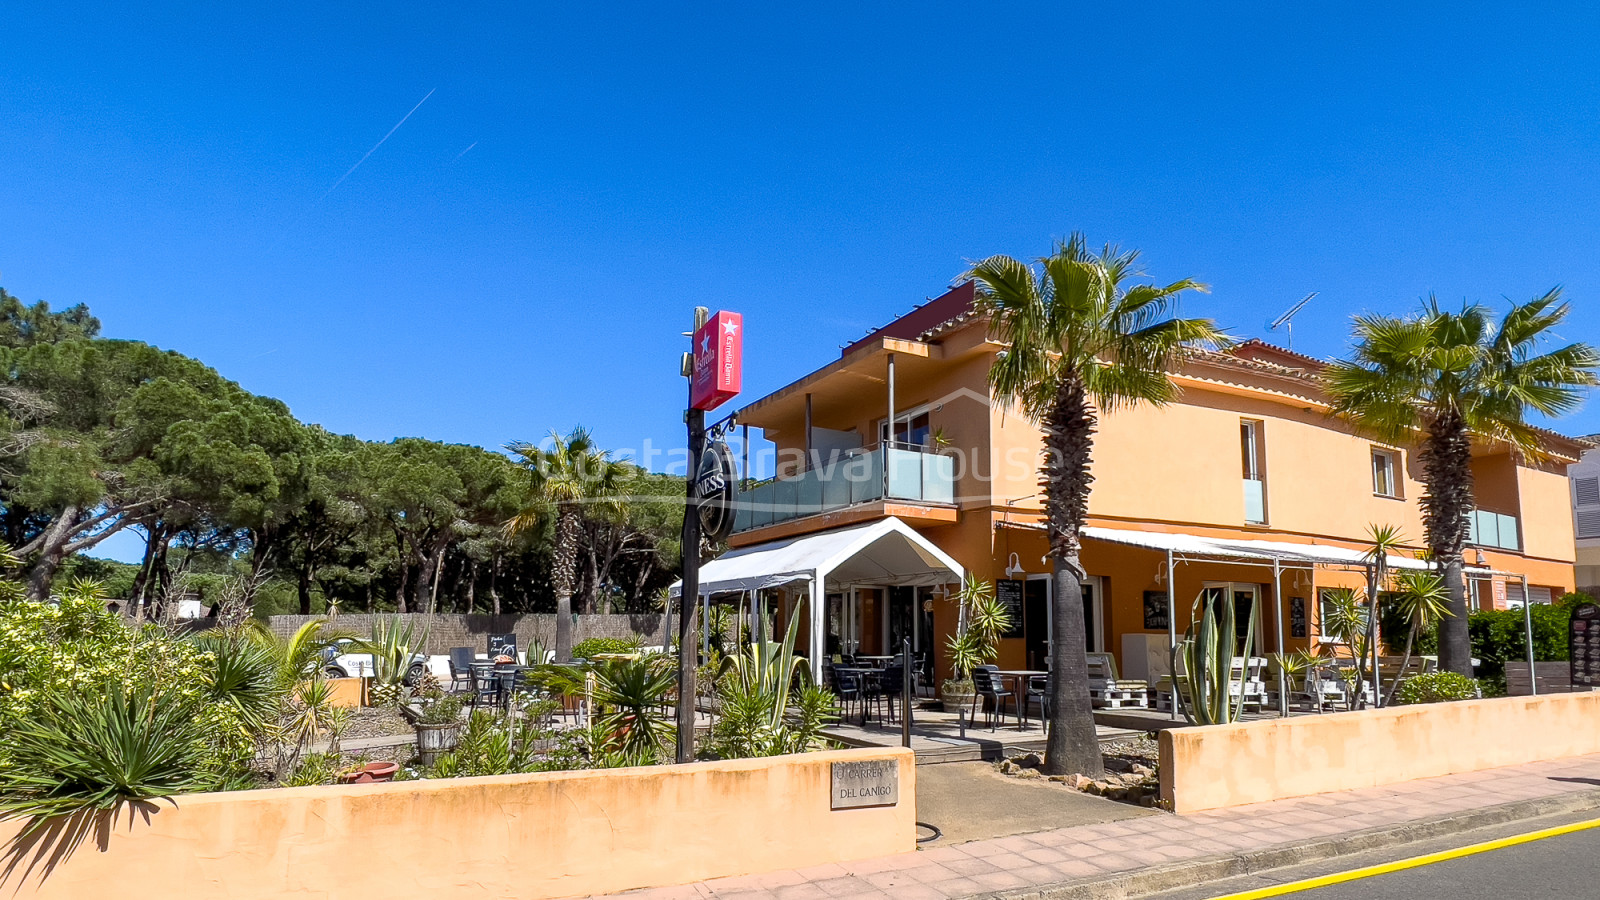 Aparthotel with 6 apartments for sale on the beach of Pals